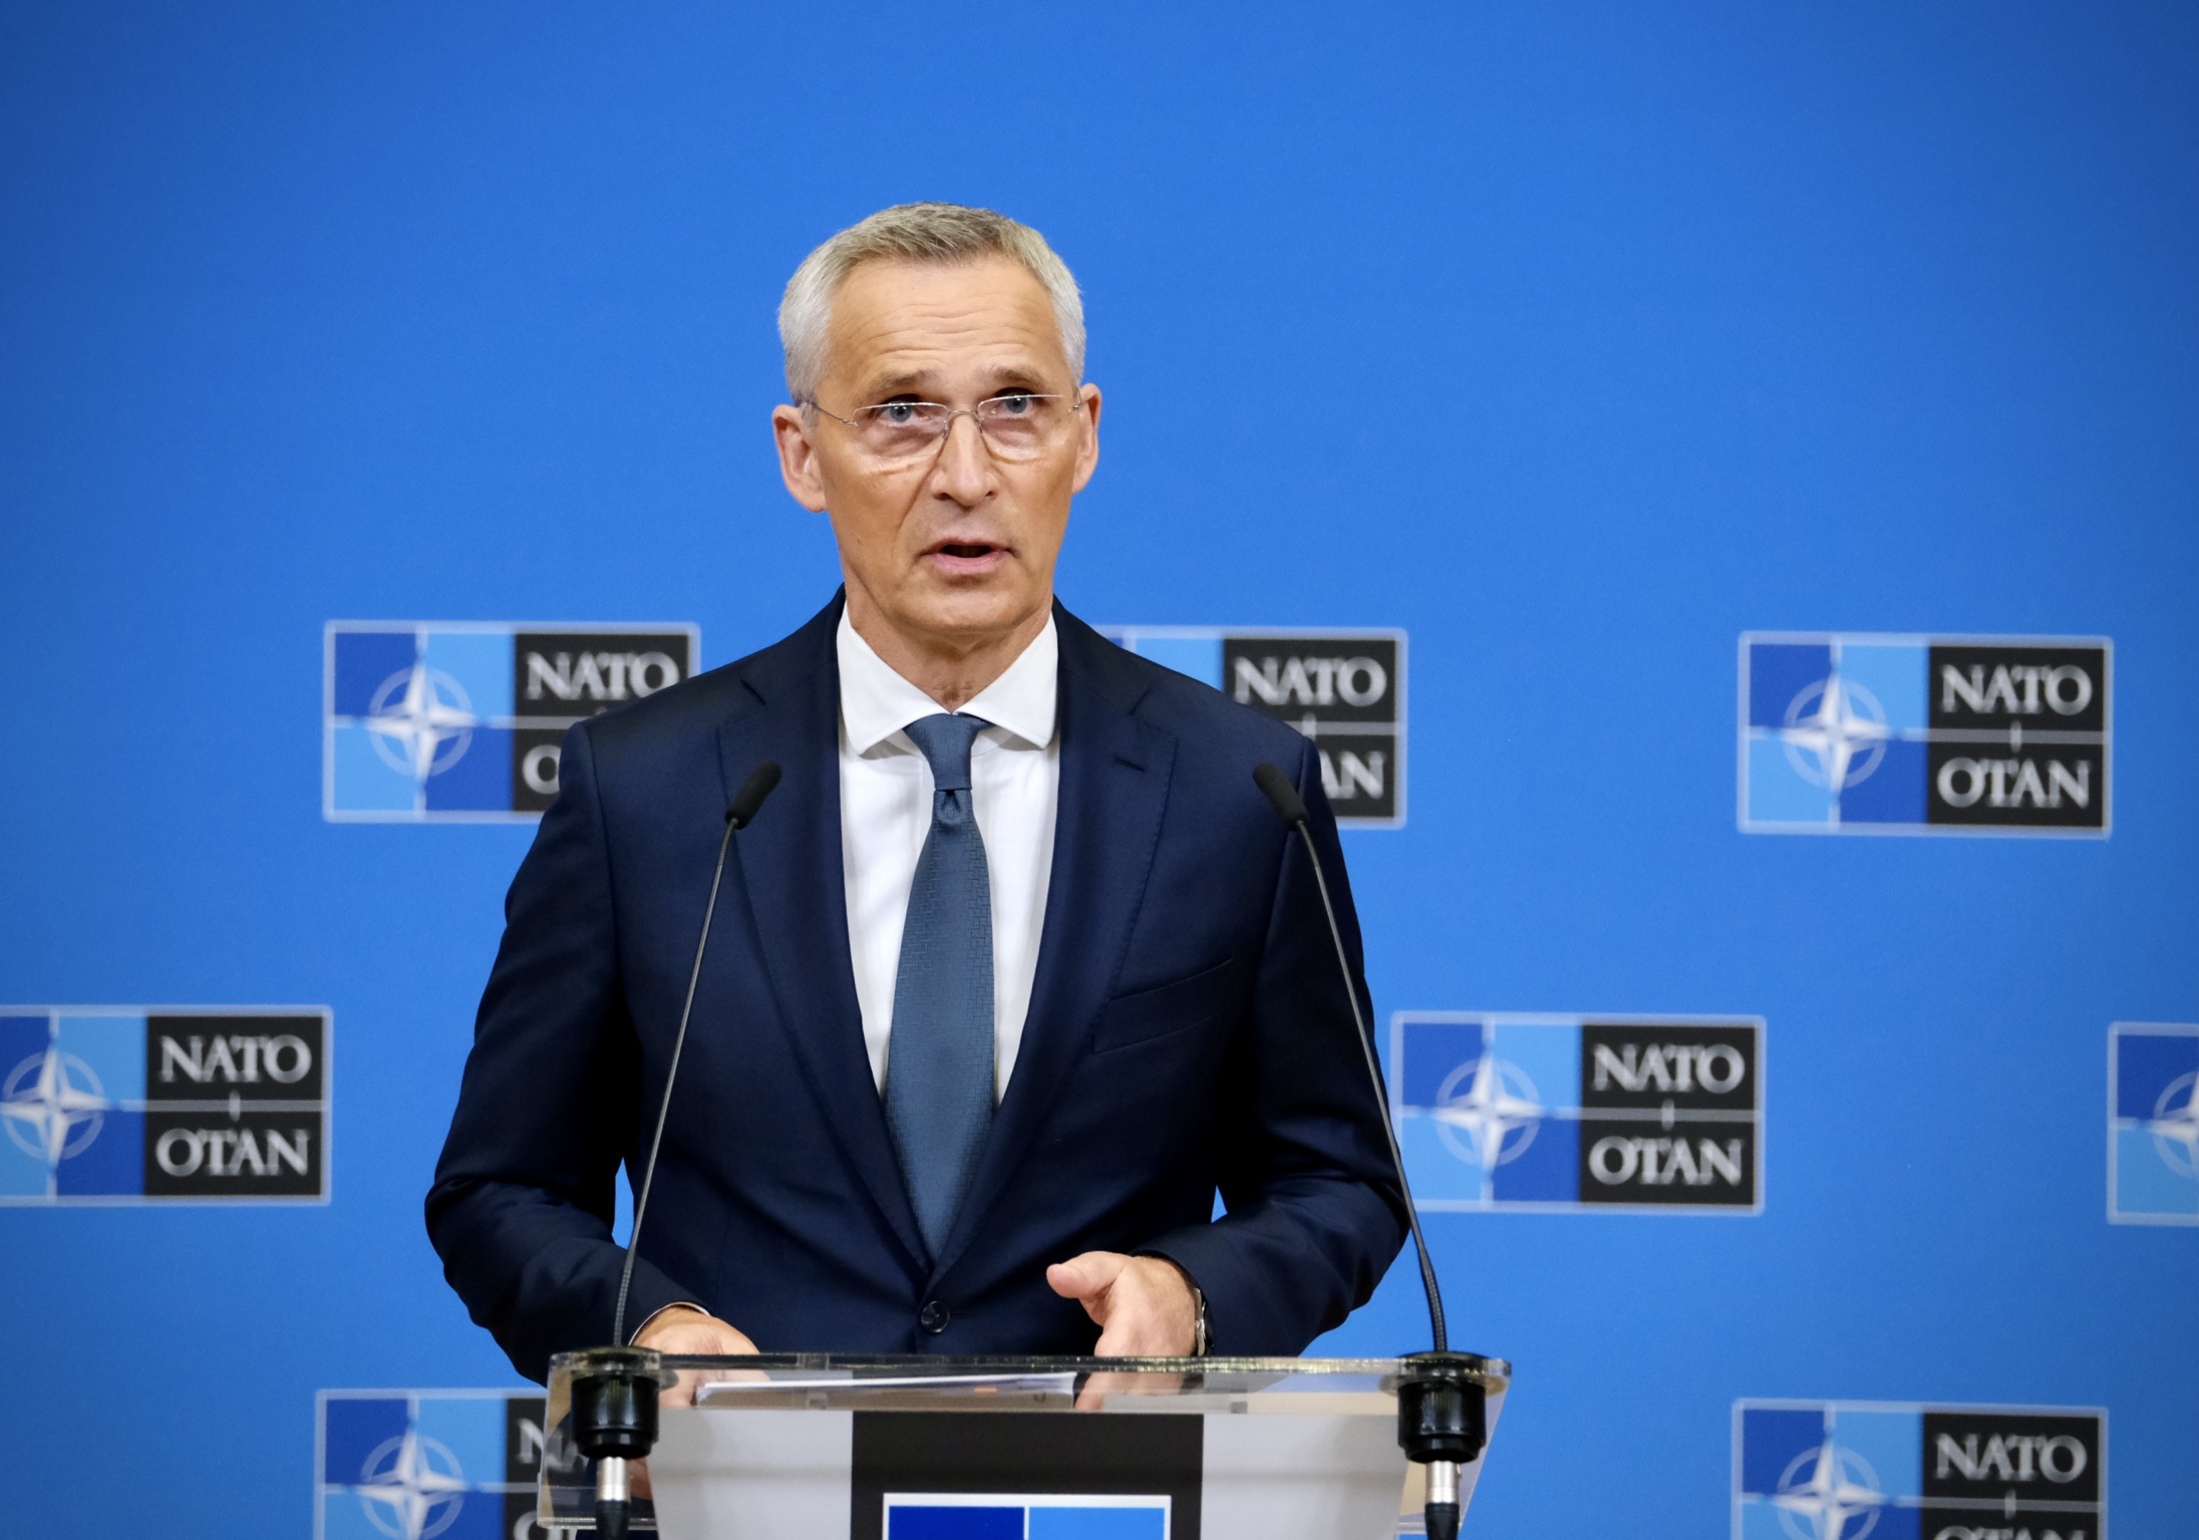 NATO summit in Vilnius – will it live up to expectations in comparison to other post-1990 summits?